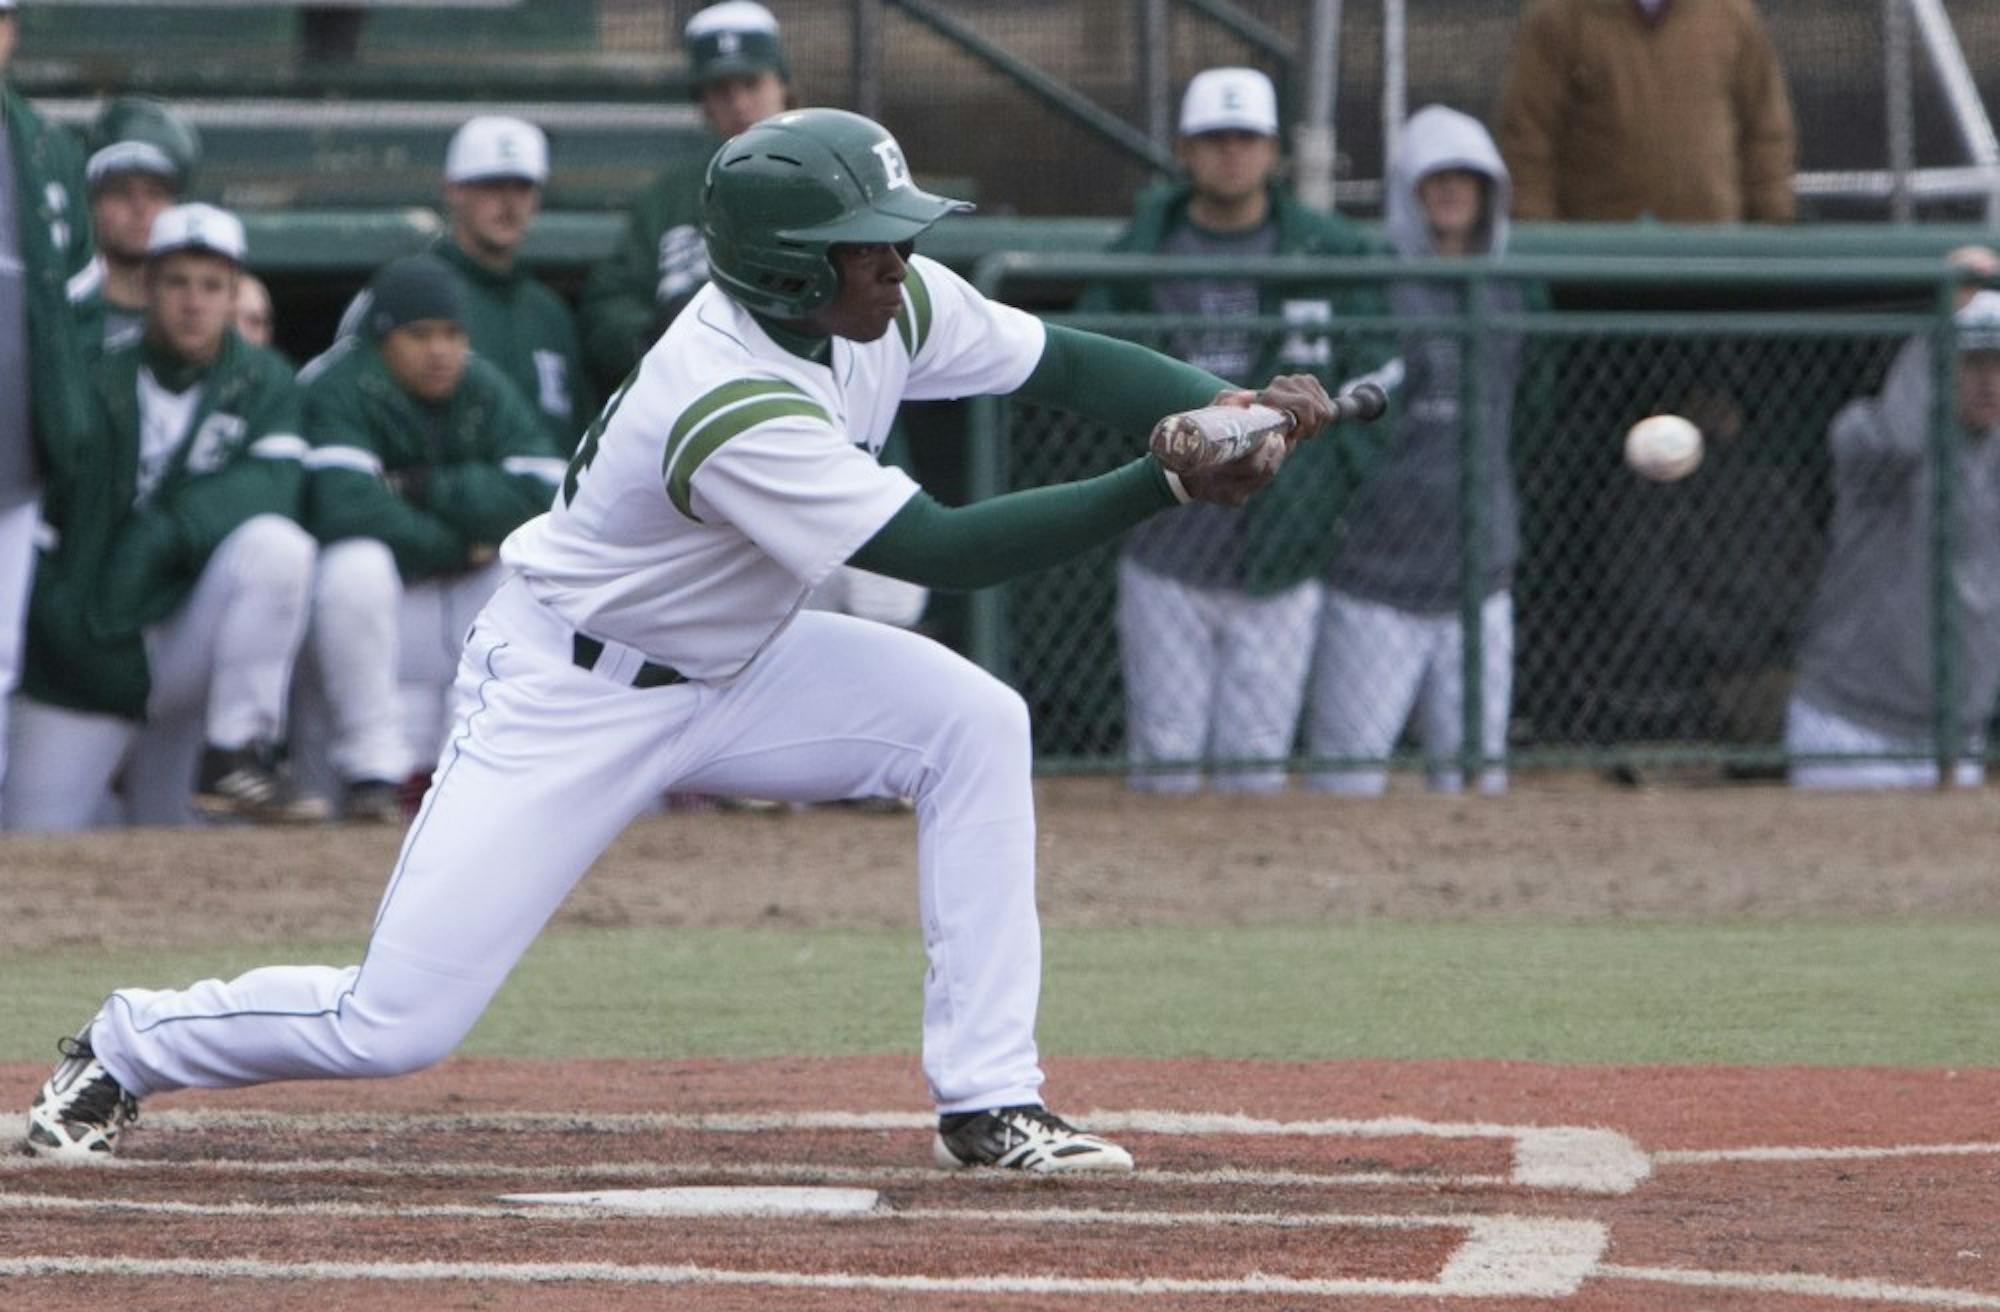 	EMU lost one game and won two against Ohio University in its first in-conference series.